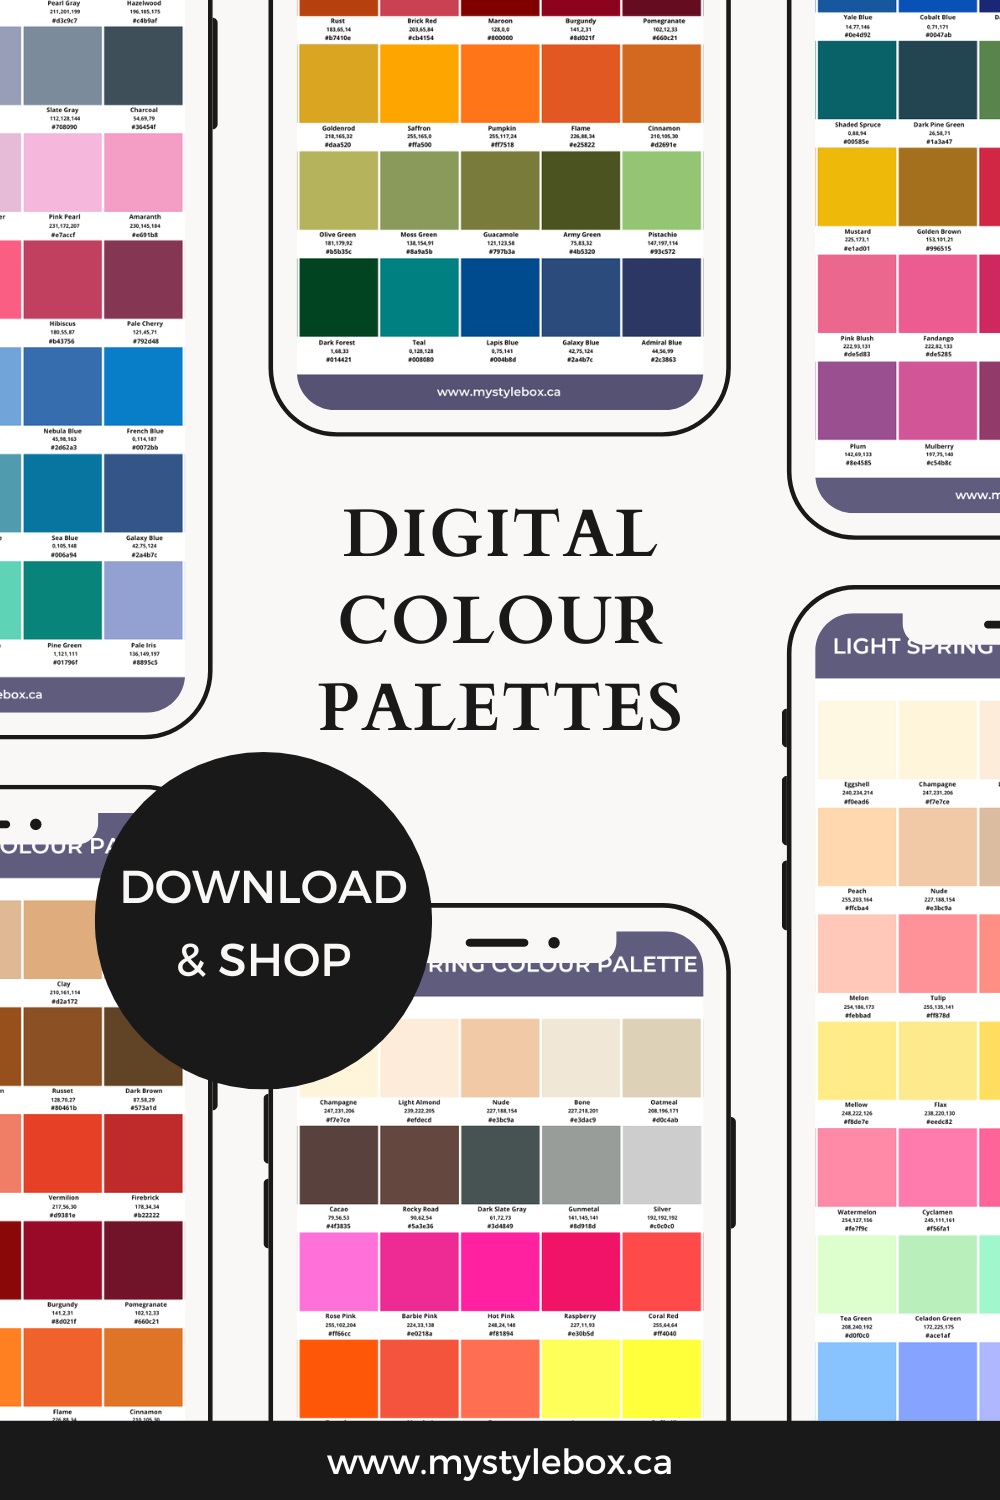 Digital Color Palettes & Combinations for Color Analysis